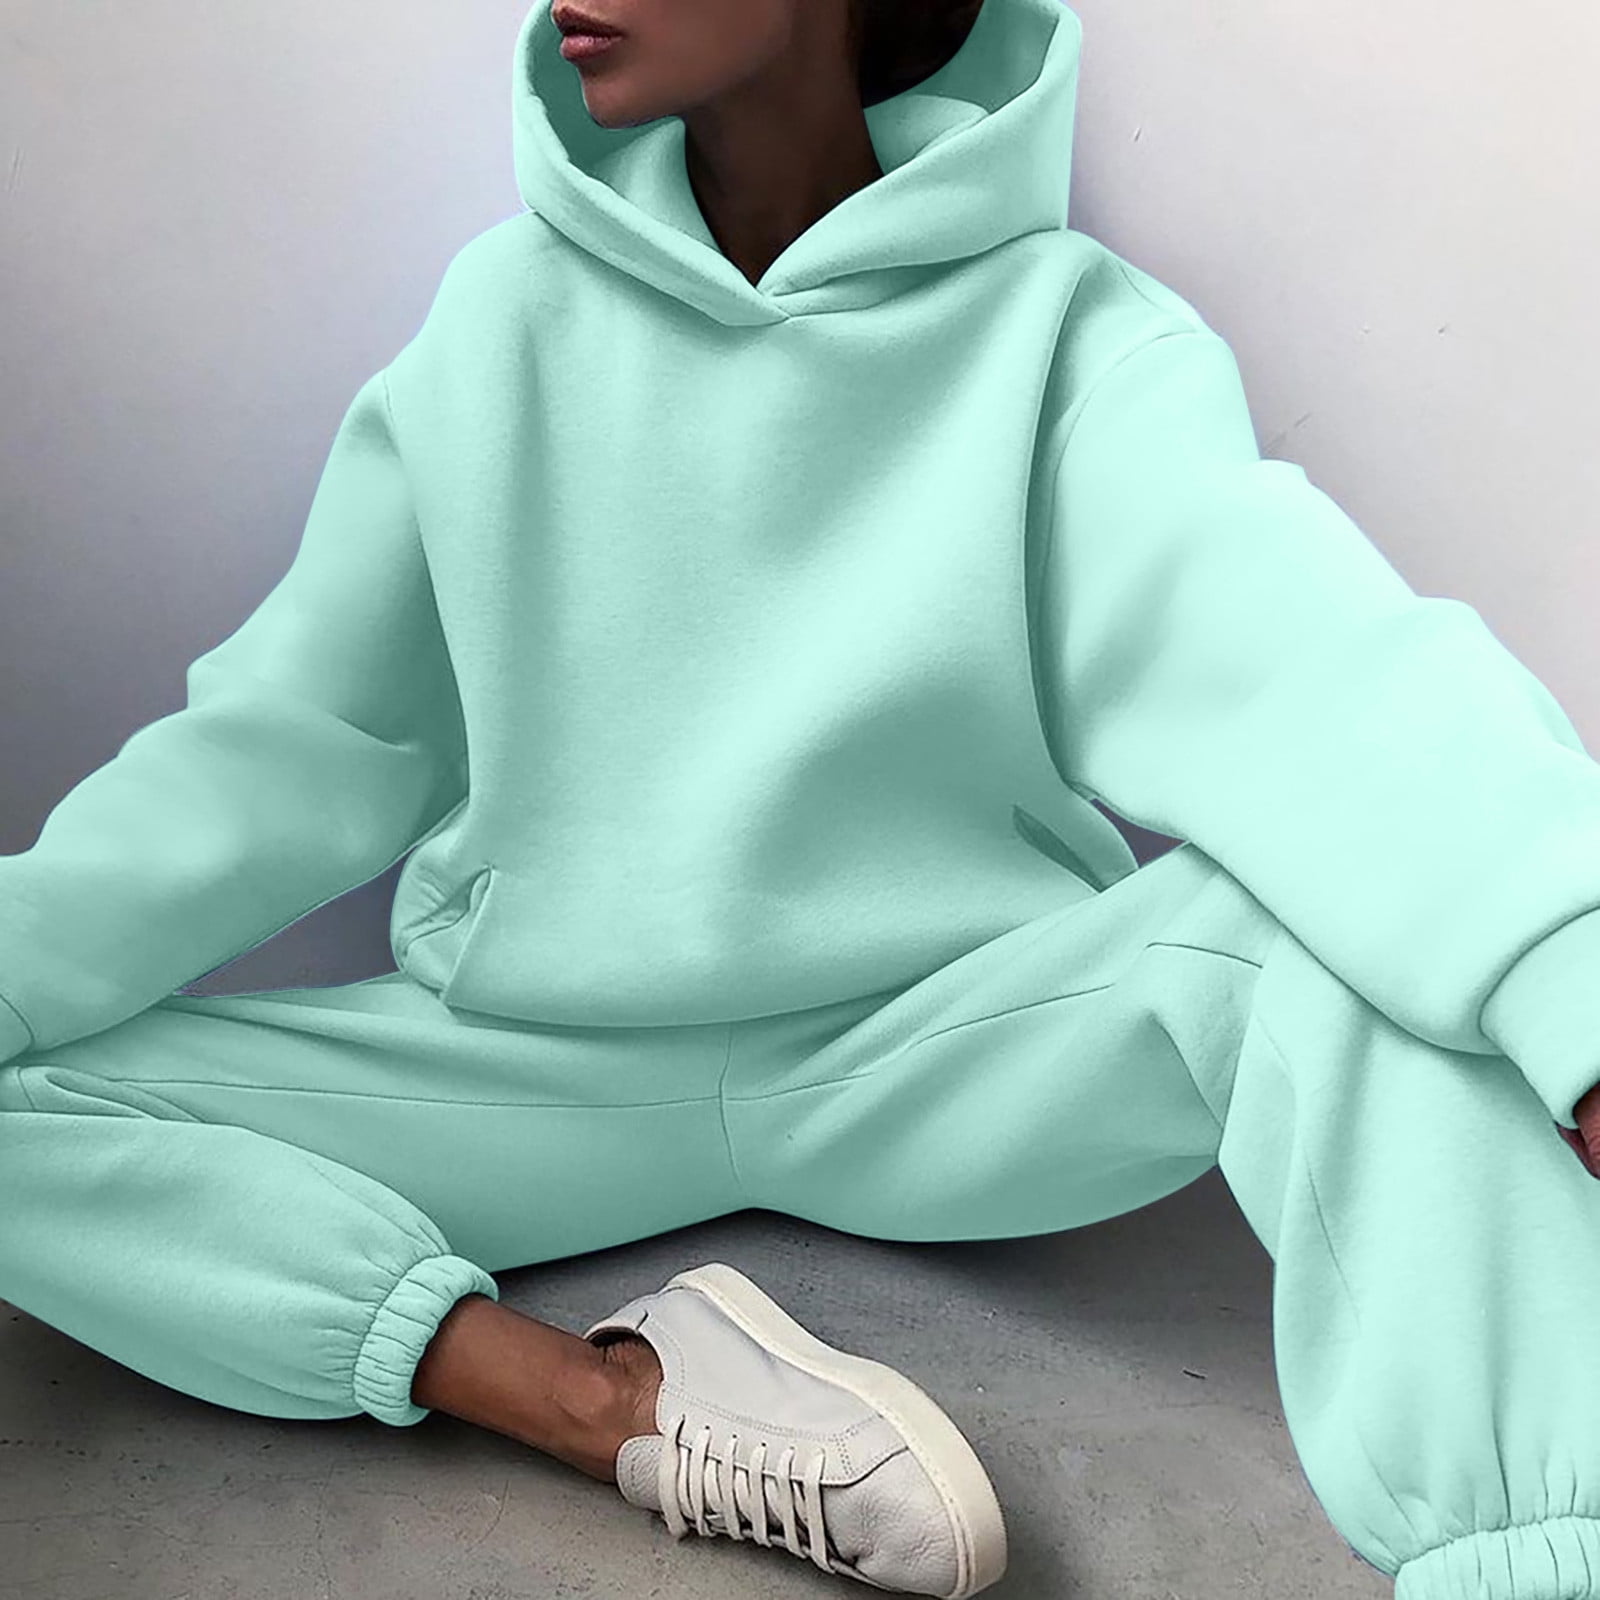 RQYYD Jogging Suits for Women - Solid Color Tracksuit Fall Winter Hoodie 2  Piece Jogging Suits with Pockets on Clearance (Mint Green,L) 